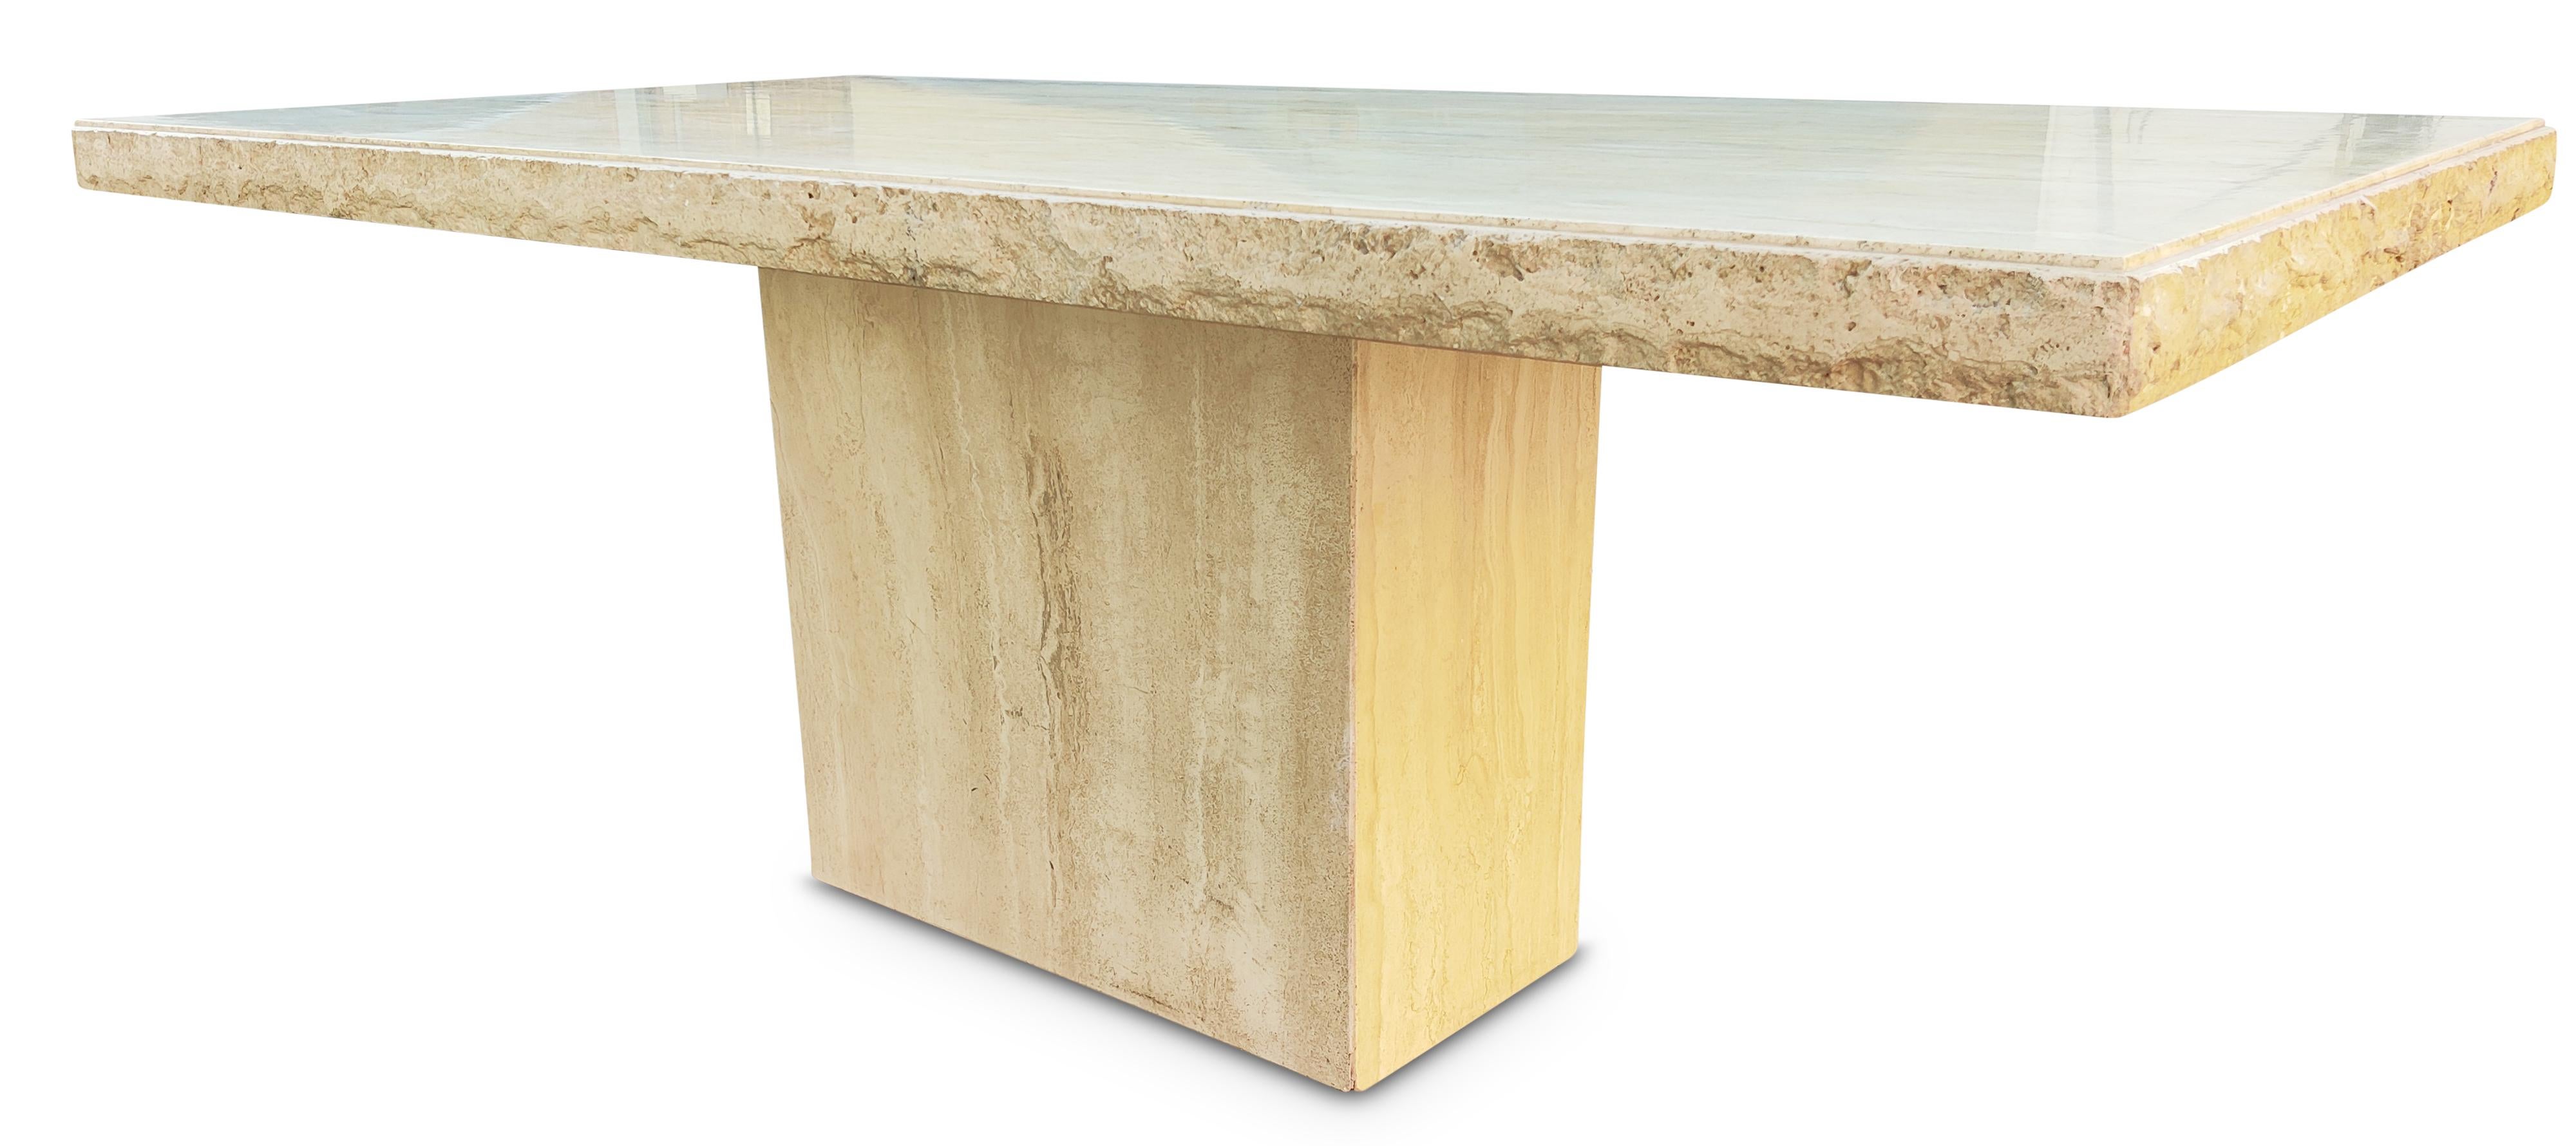 Late 20th Century Large Italian Marble Travertine Dining Table, Desk, Polished & Chip Carved Top For Sale